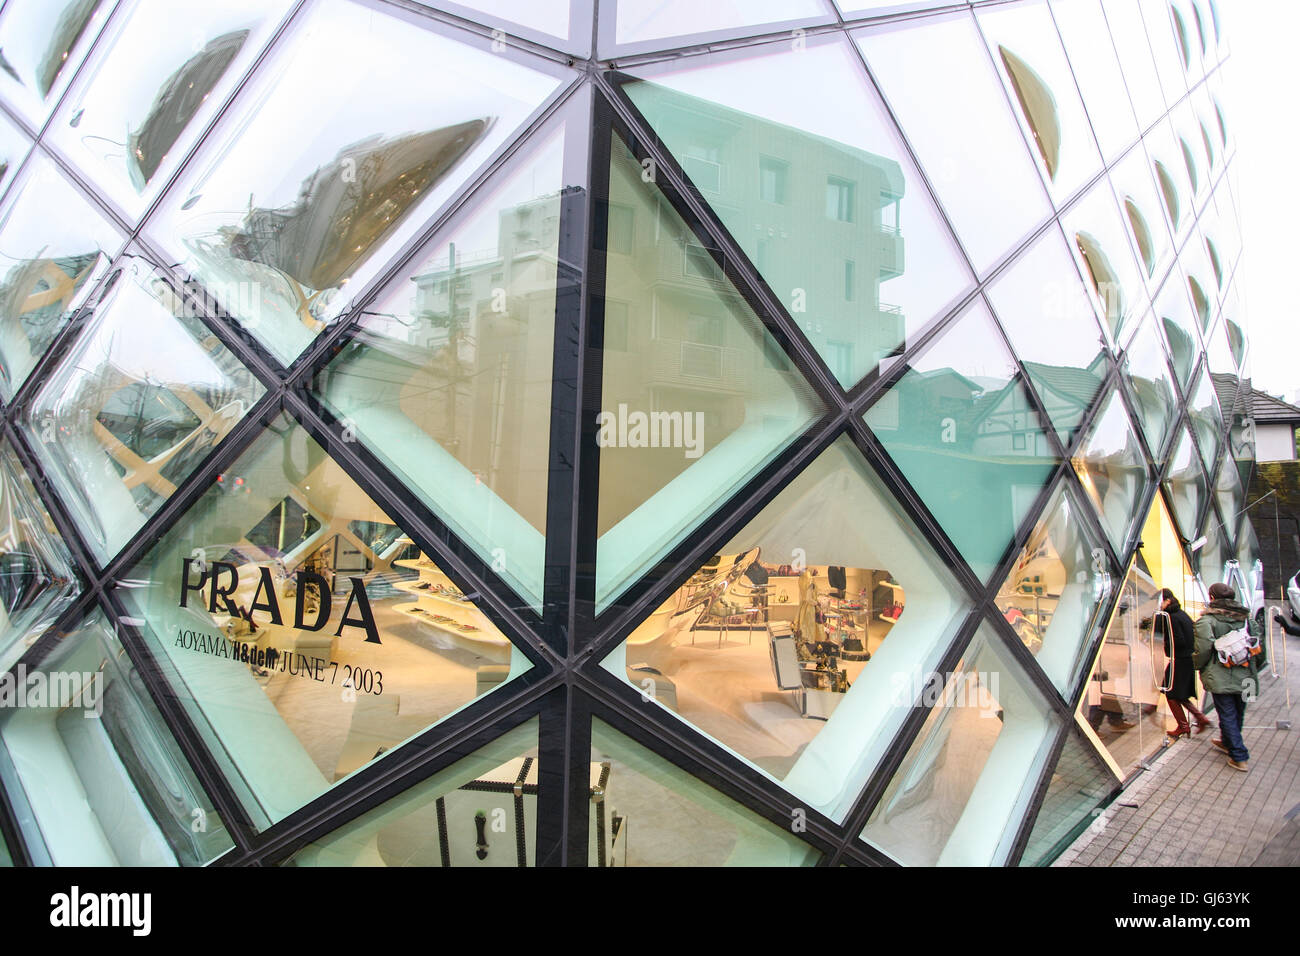 Page 3 - Prada Store Tokyo Japan High Resolution Stock Photography and  Images - Alamy